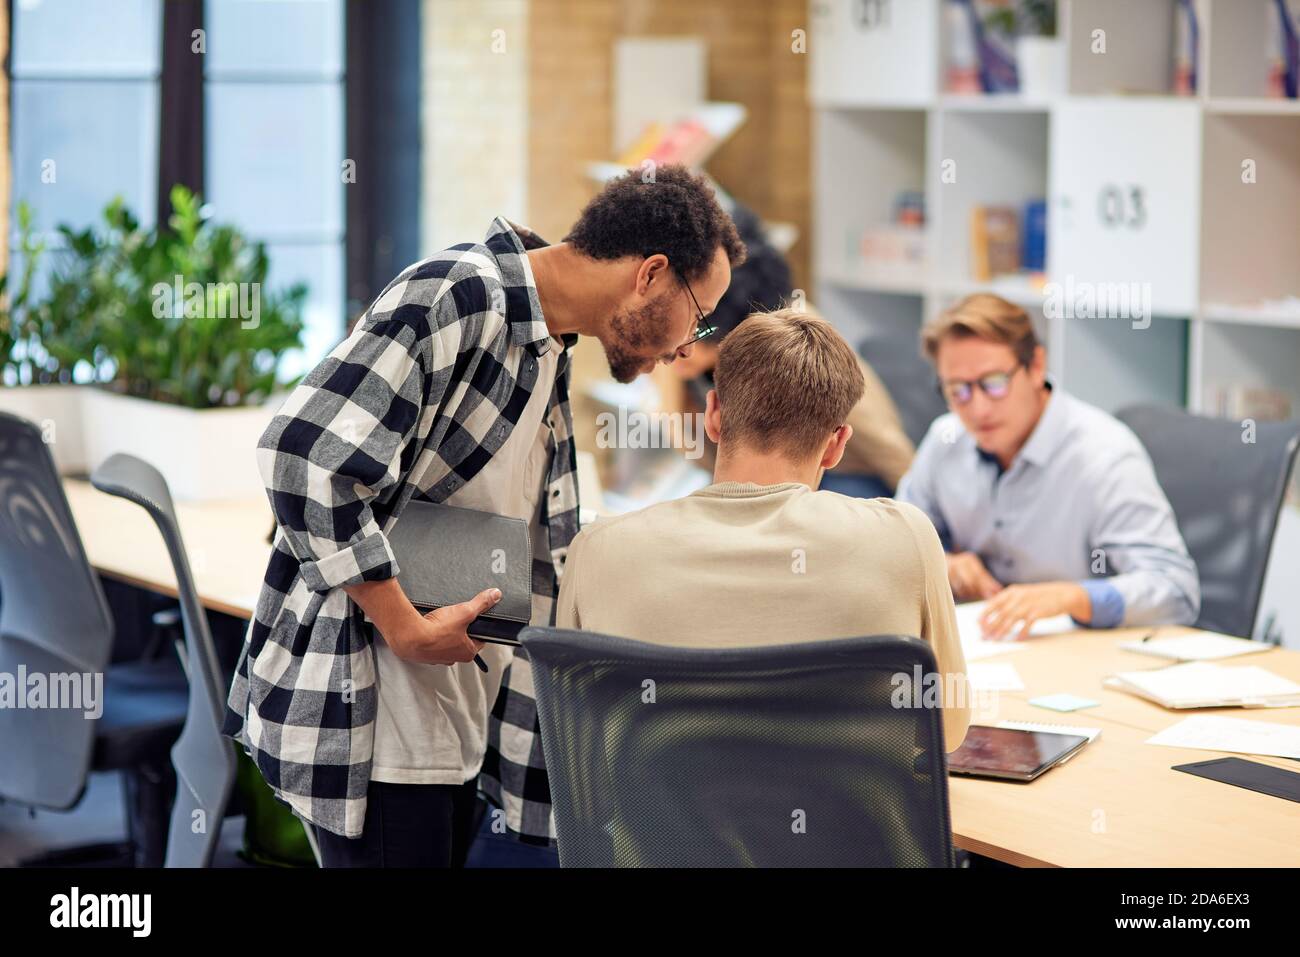 Rear view of two young diverse colleagues discussing something while working together in the modern office or coworking space. Teamwork and collaboration concept Stock Photo